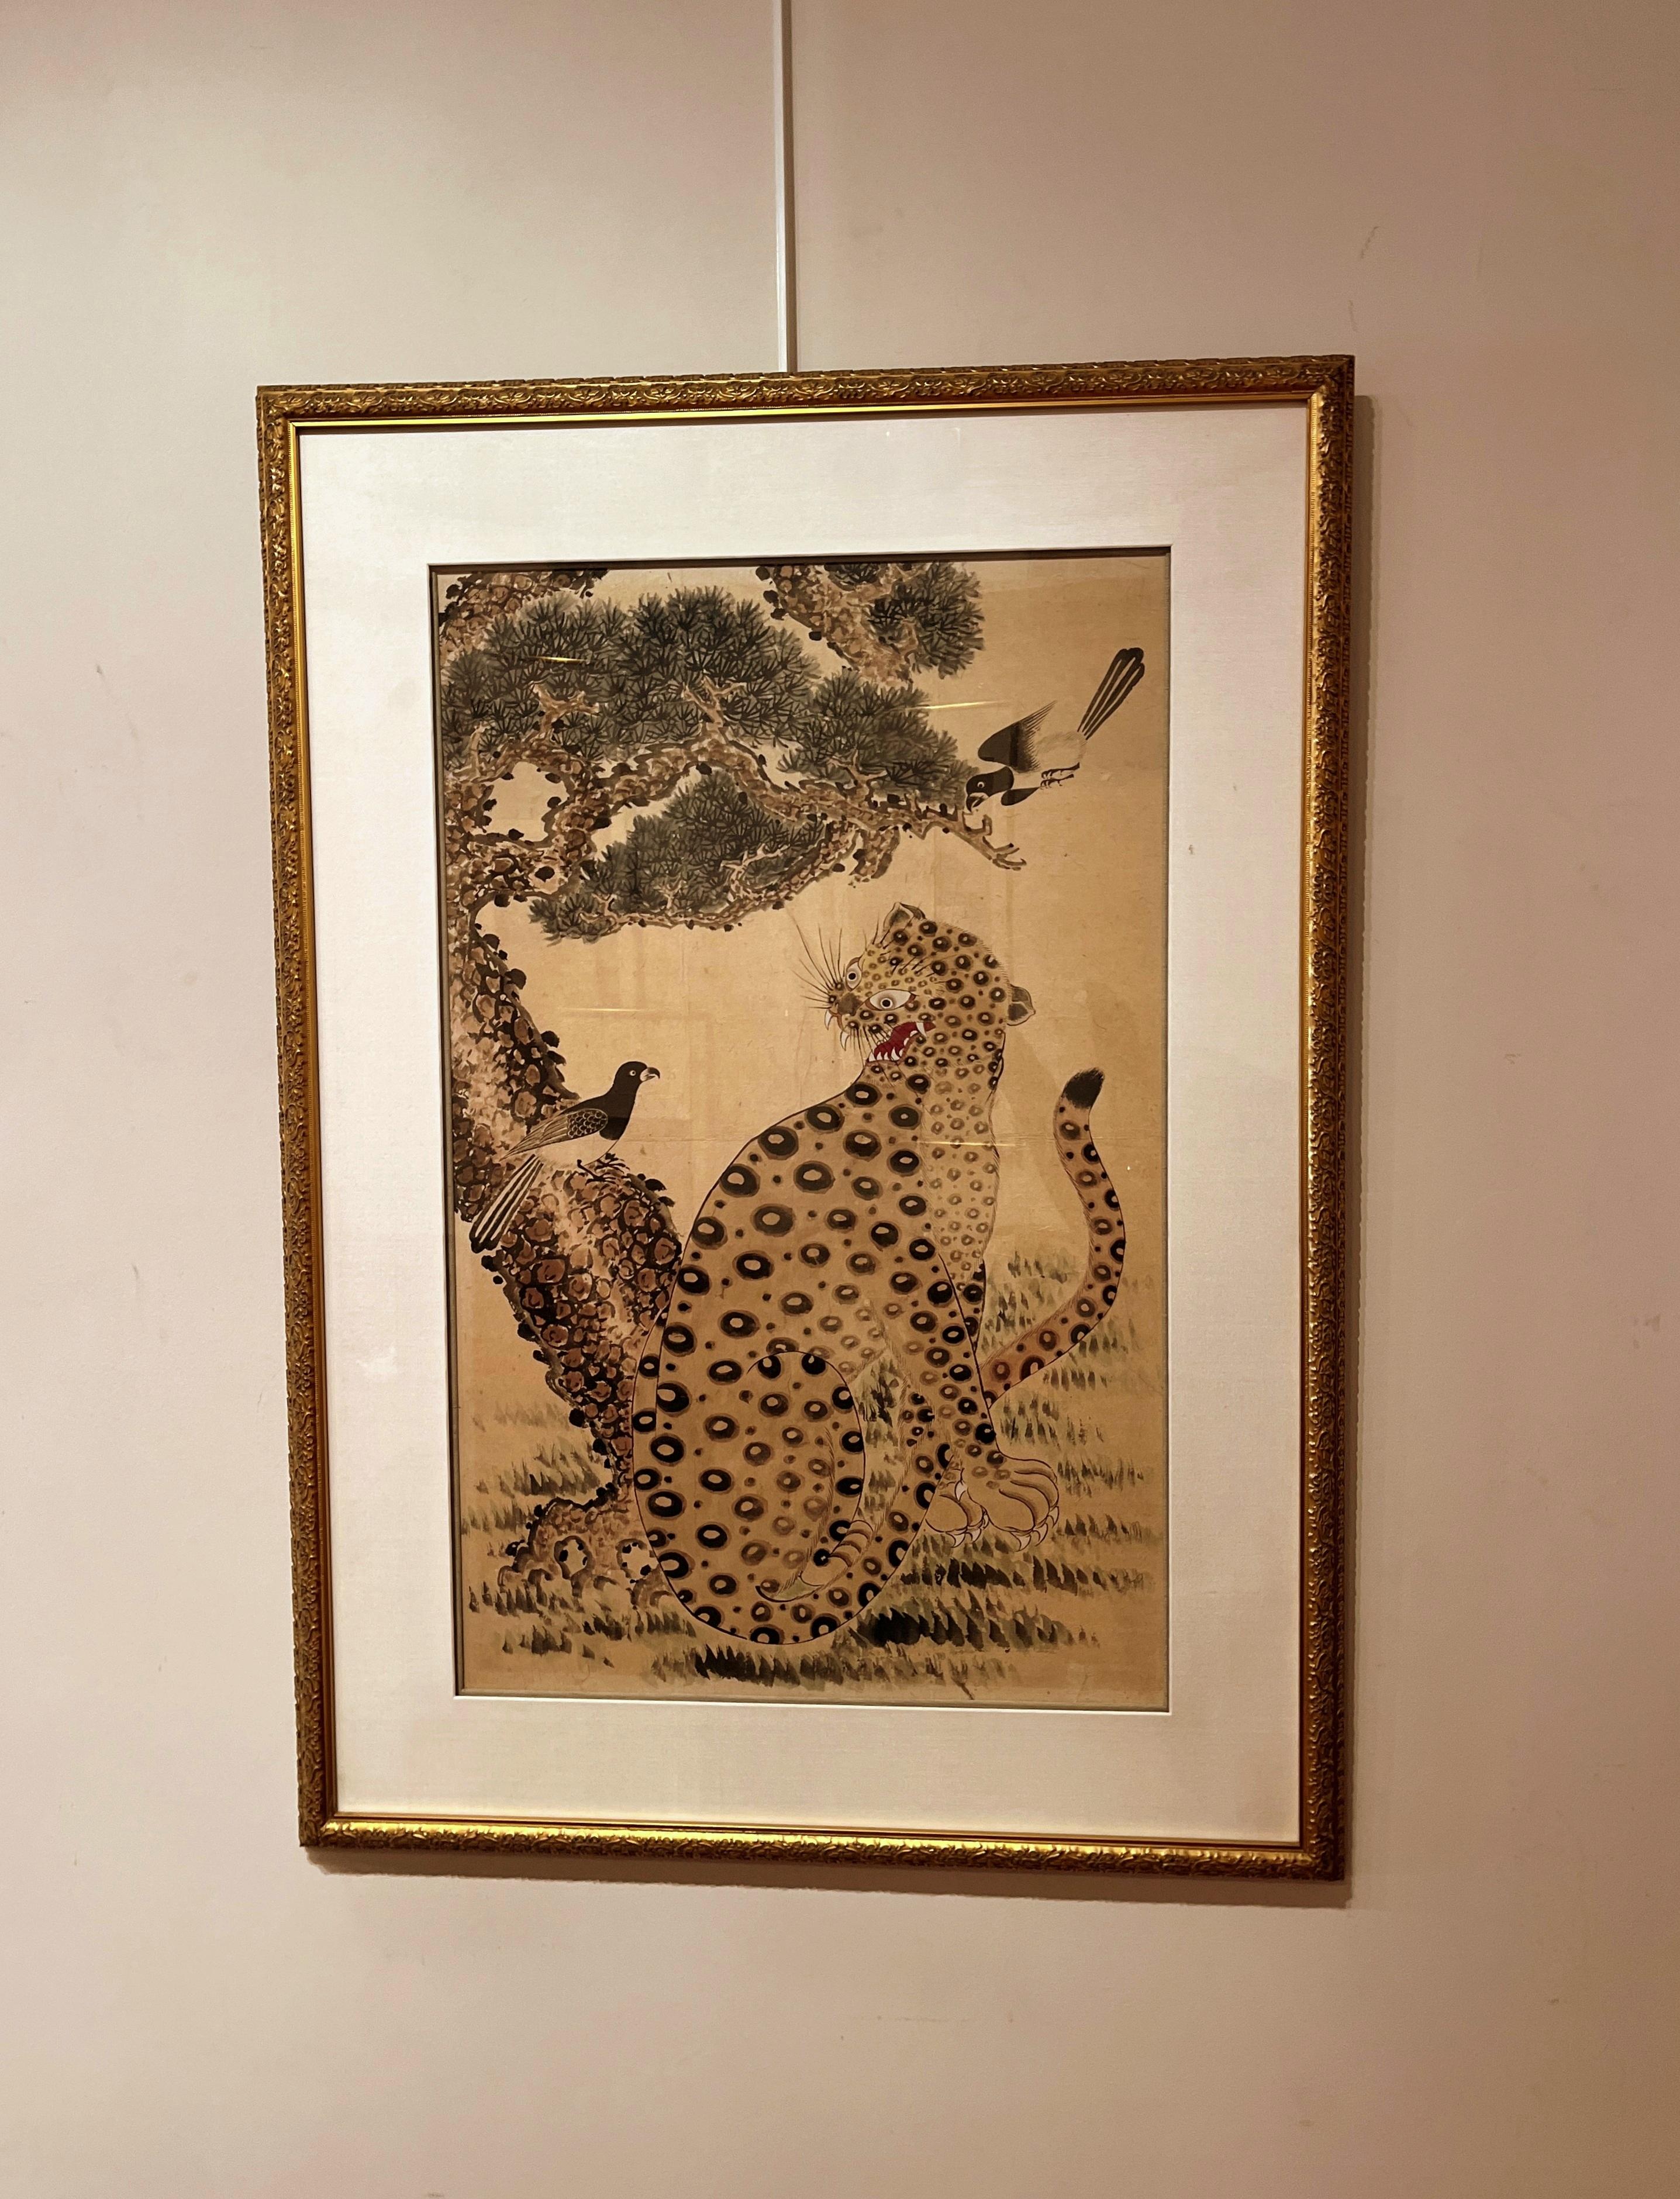 Korean Minhwa Spotted Leopard Snarling Magpie and another Magpie flying in the pine tree
 Minhwa, Korean folk paintings, portray the simple and unaffected daily lives of ordinary people. An invaluable part of Korea's cultural heritage, folk